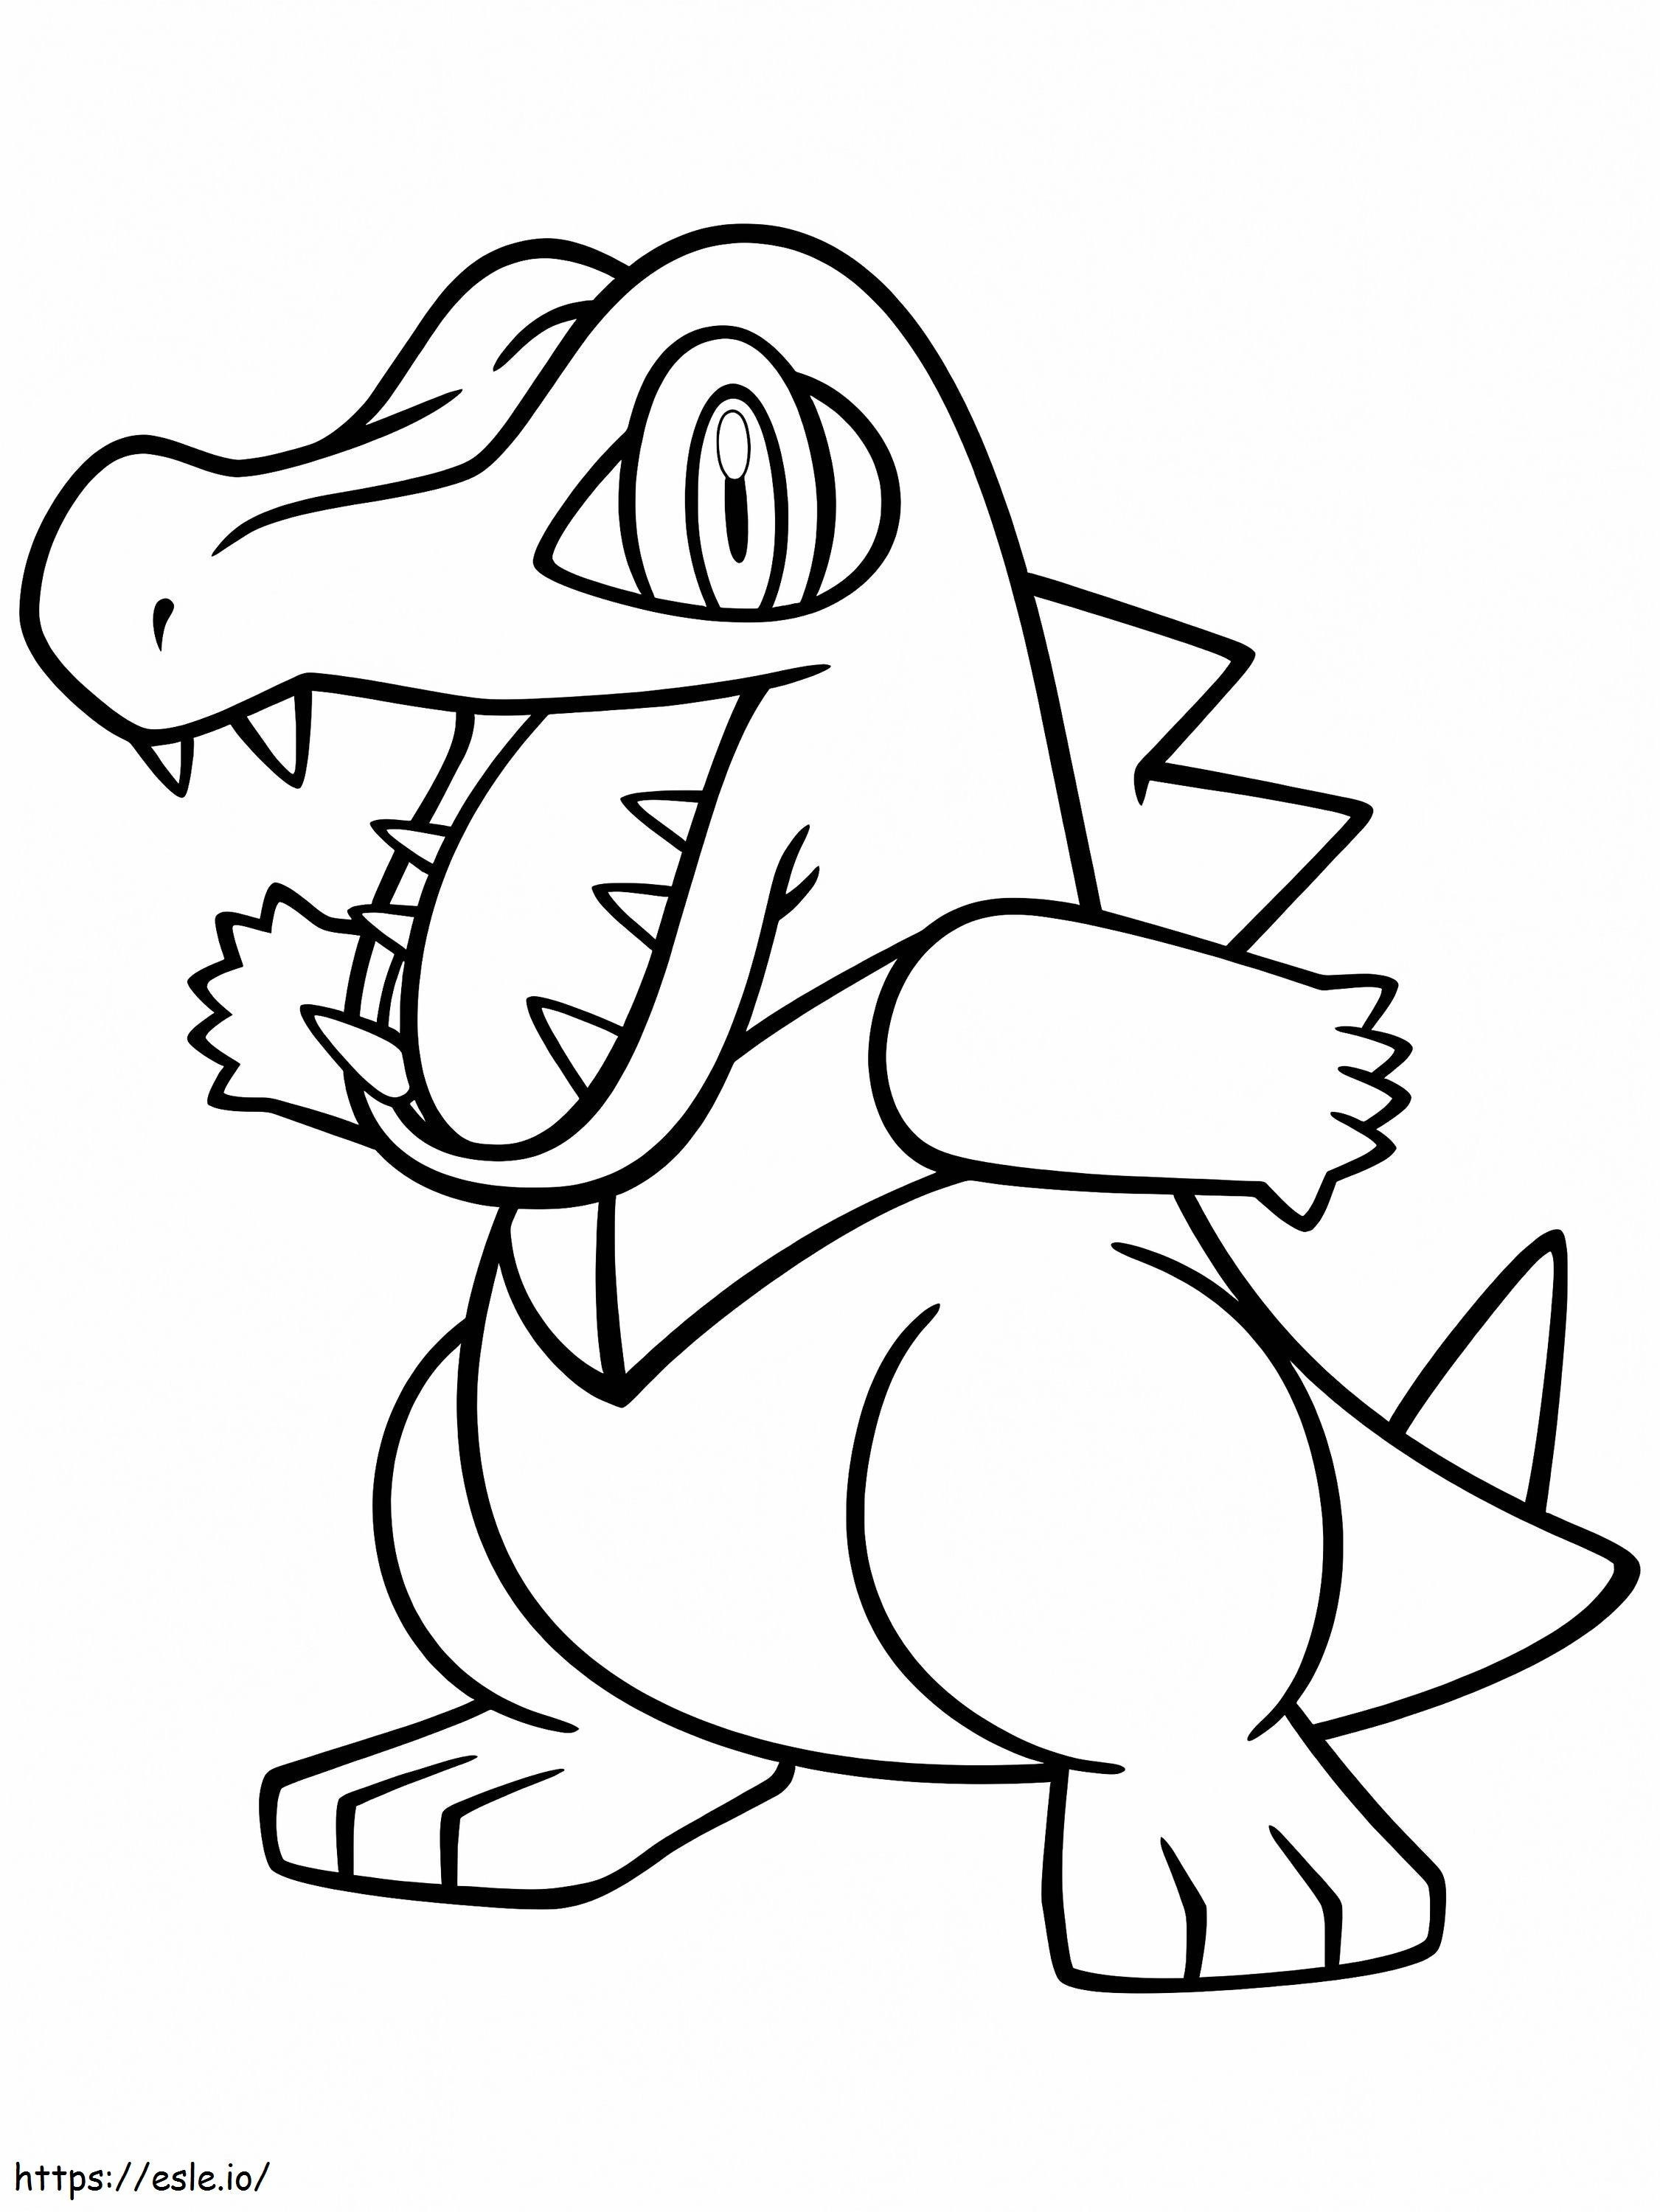 Totodile Pokemon coloring page